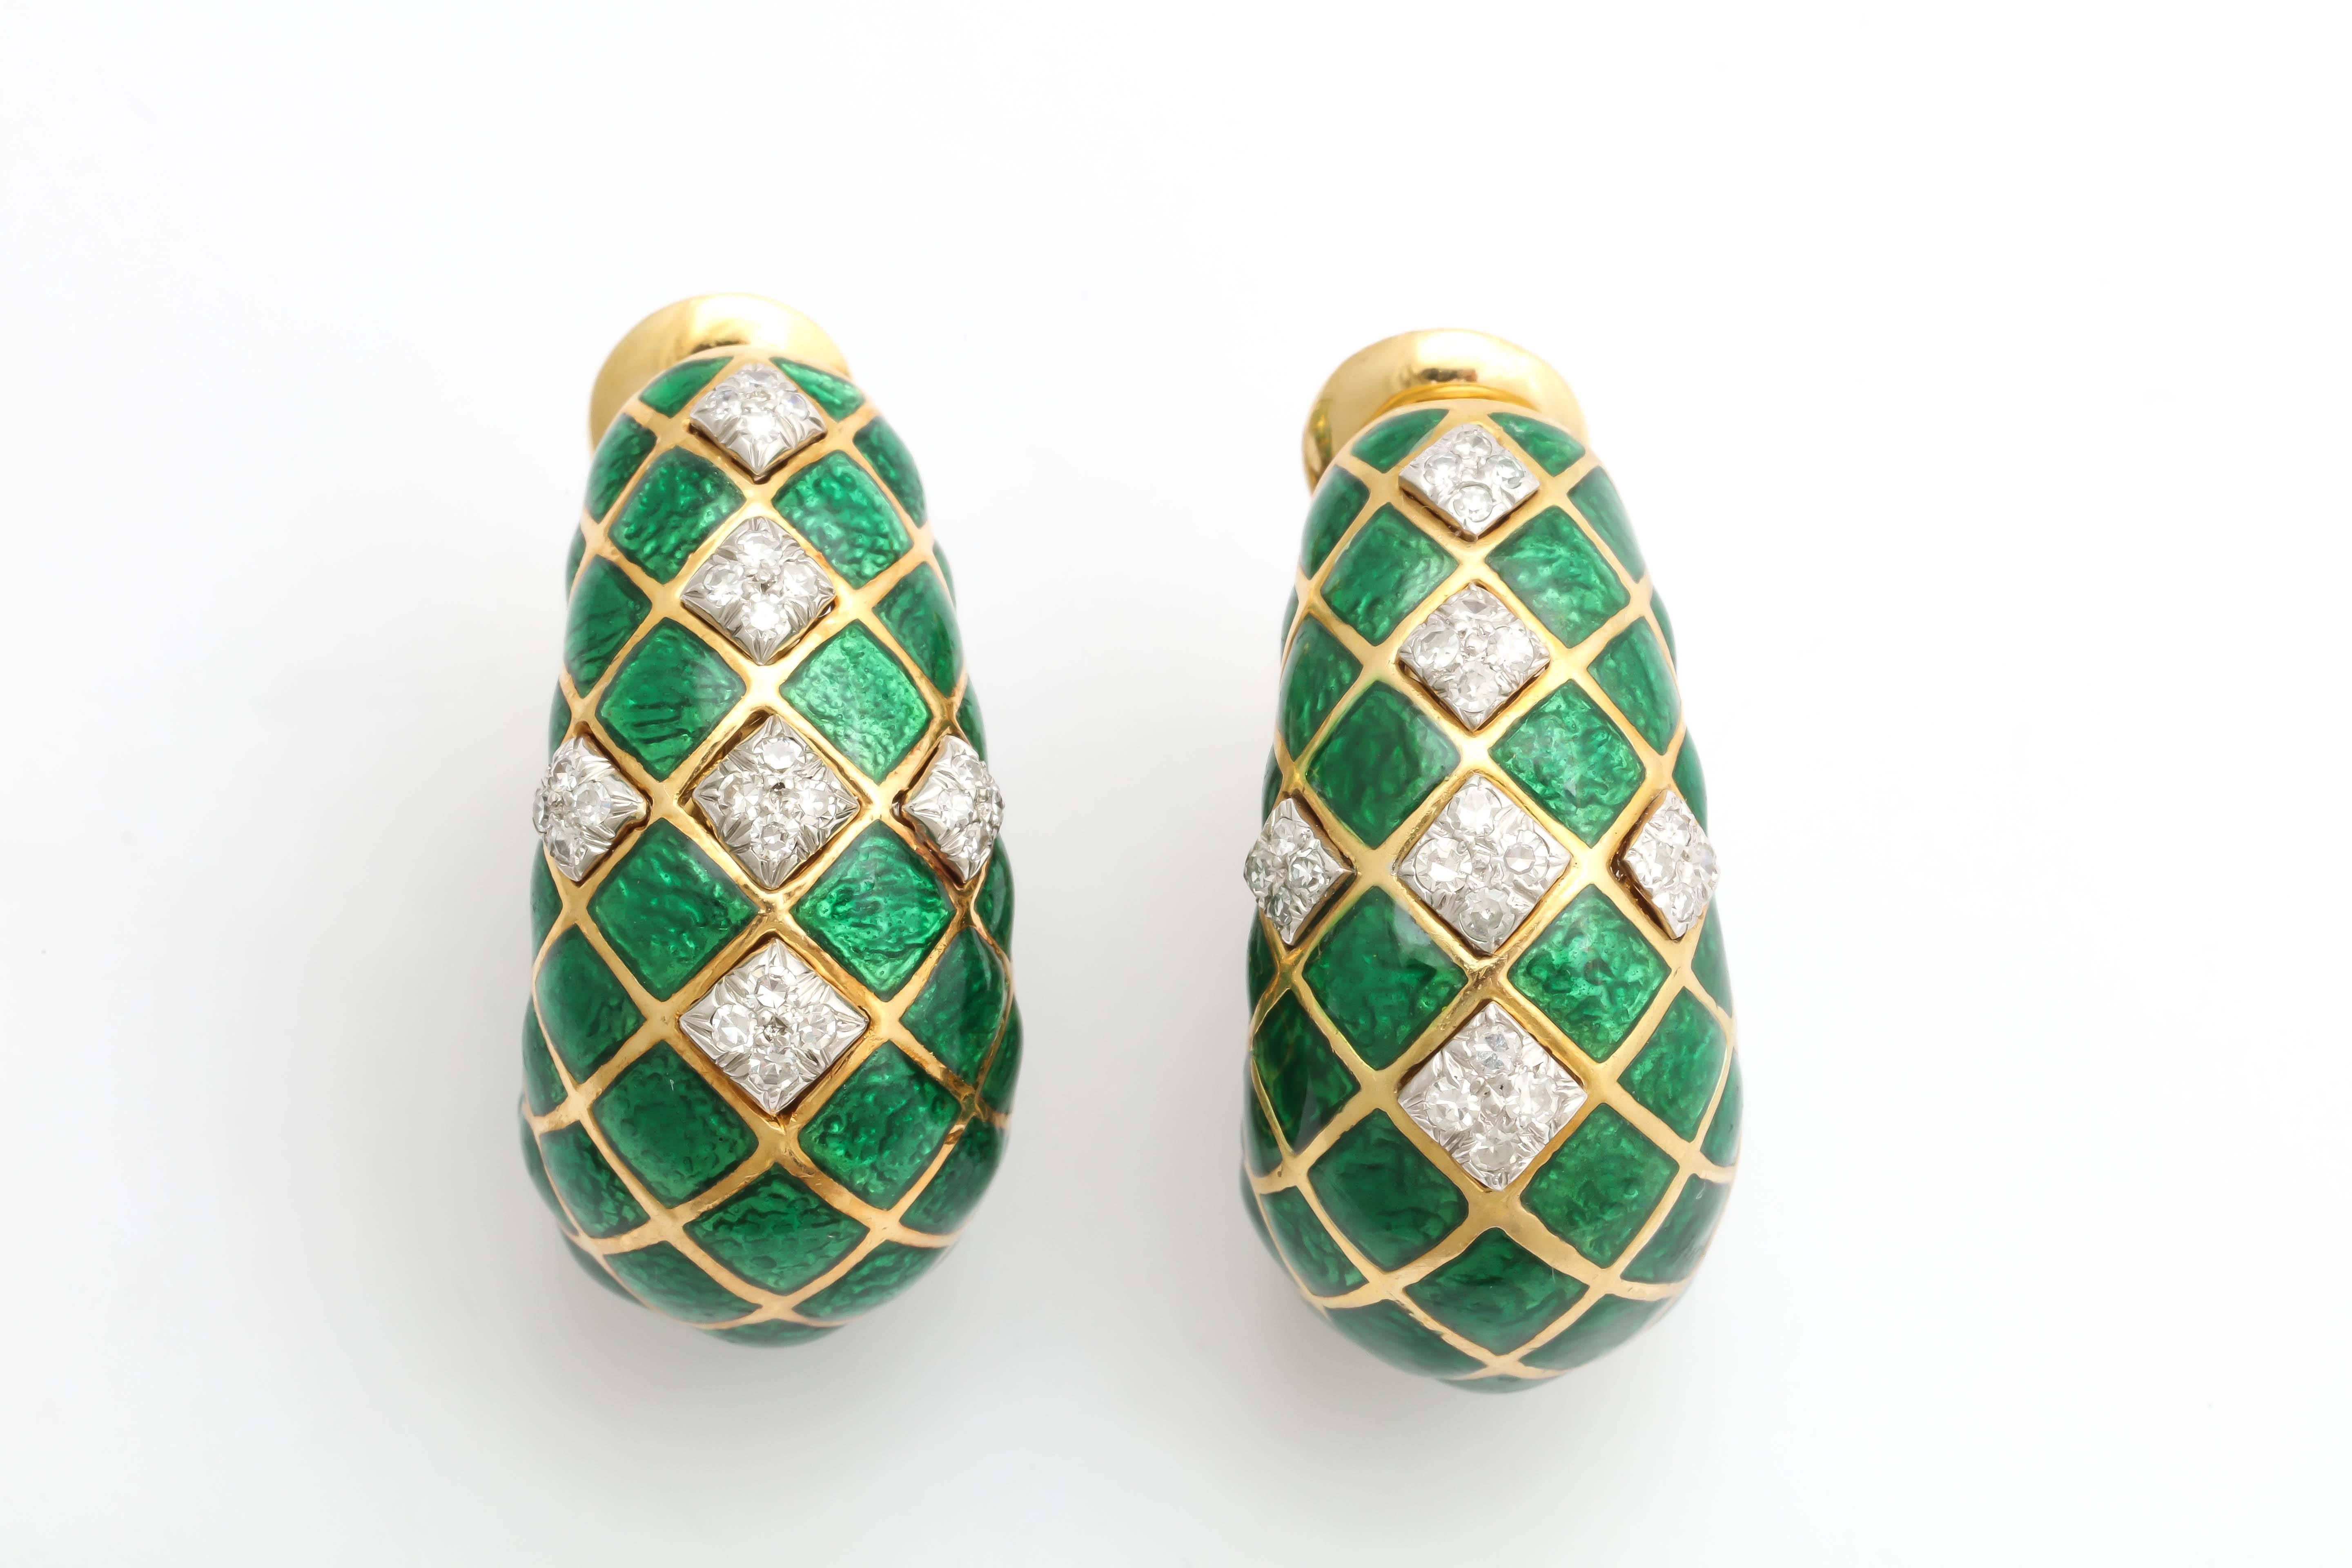 18kt yellow Gold & Irridescent Green Enamel Criss-Cross Design Half Hoop Earclips Further Embellished With Panel Of Diamonds Set In Platinum. Signed David Webb And Made In the 1960's. Clip on Backs in Which Posts May Be Added For Pierced Ears.